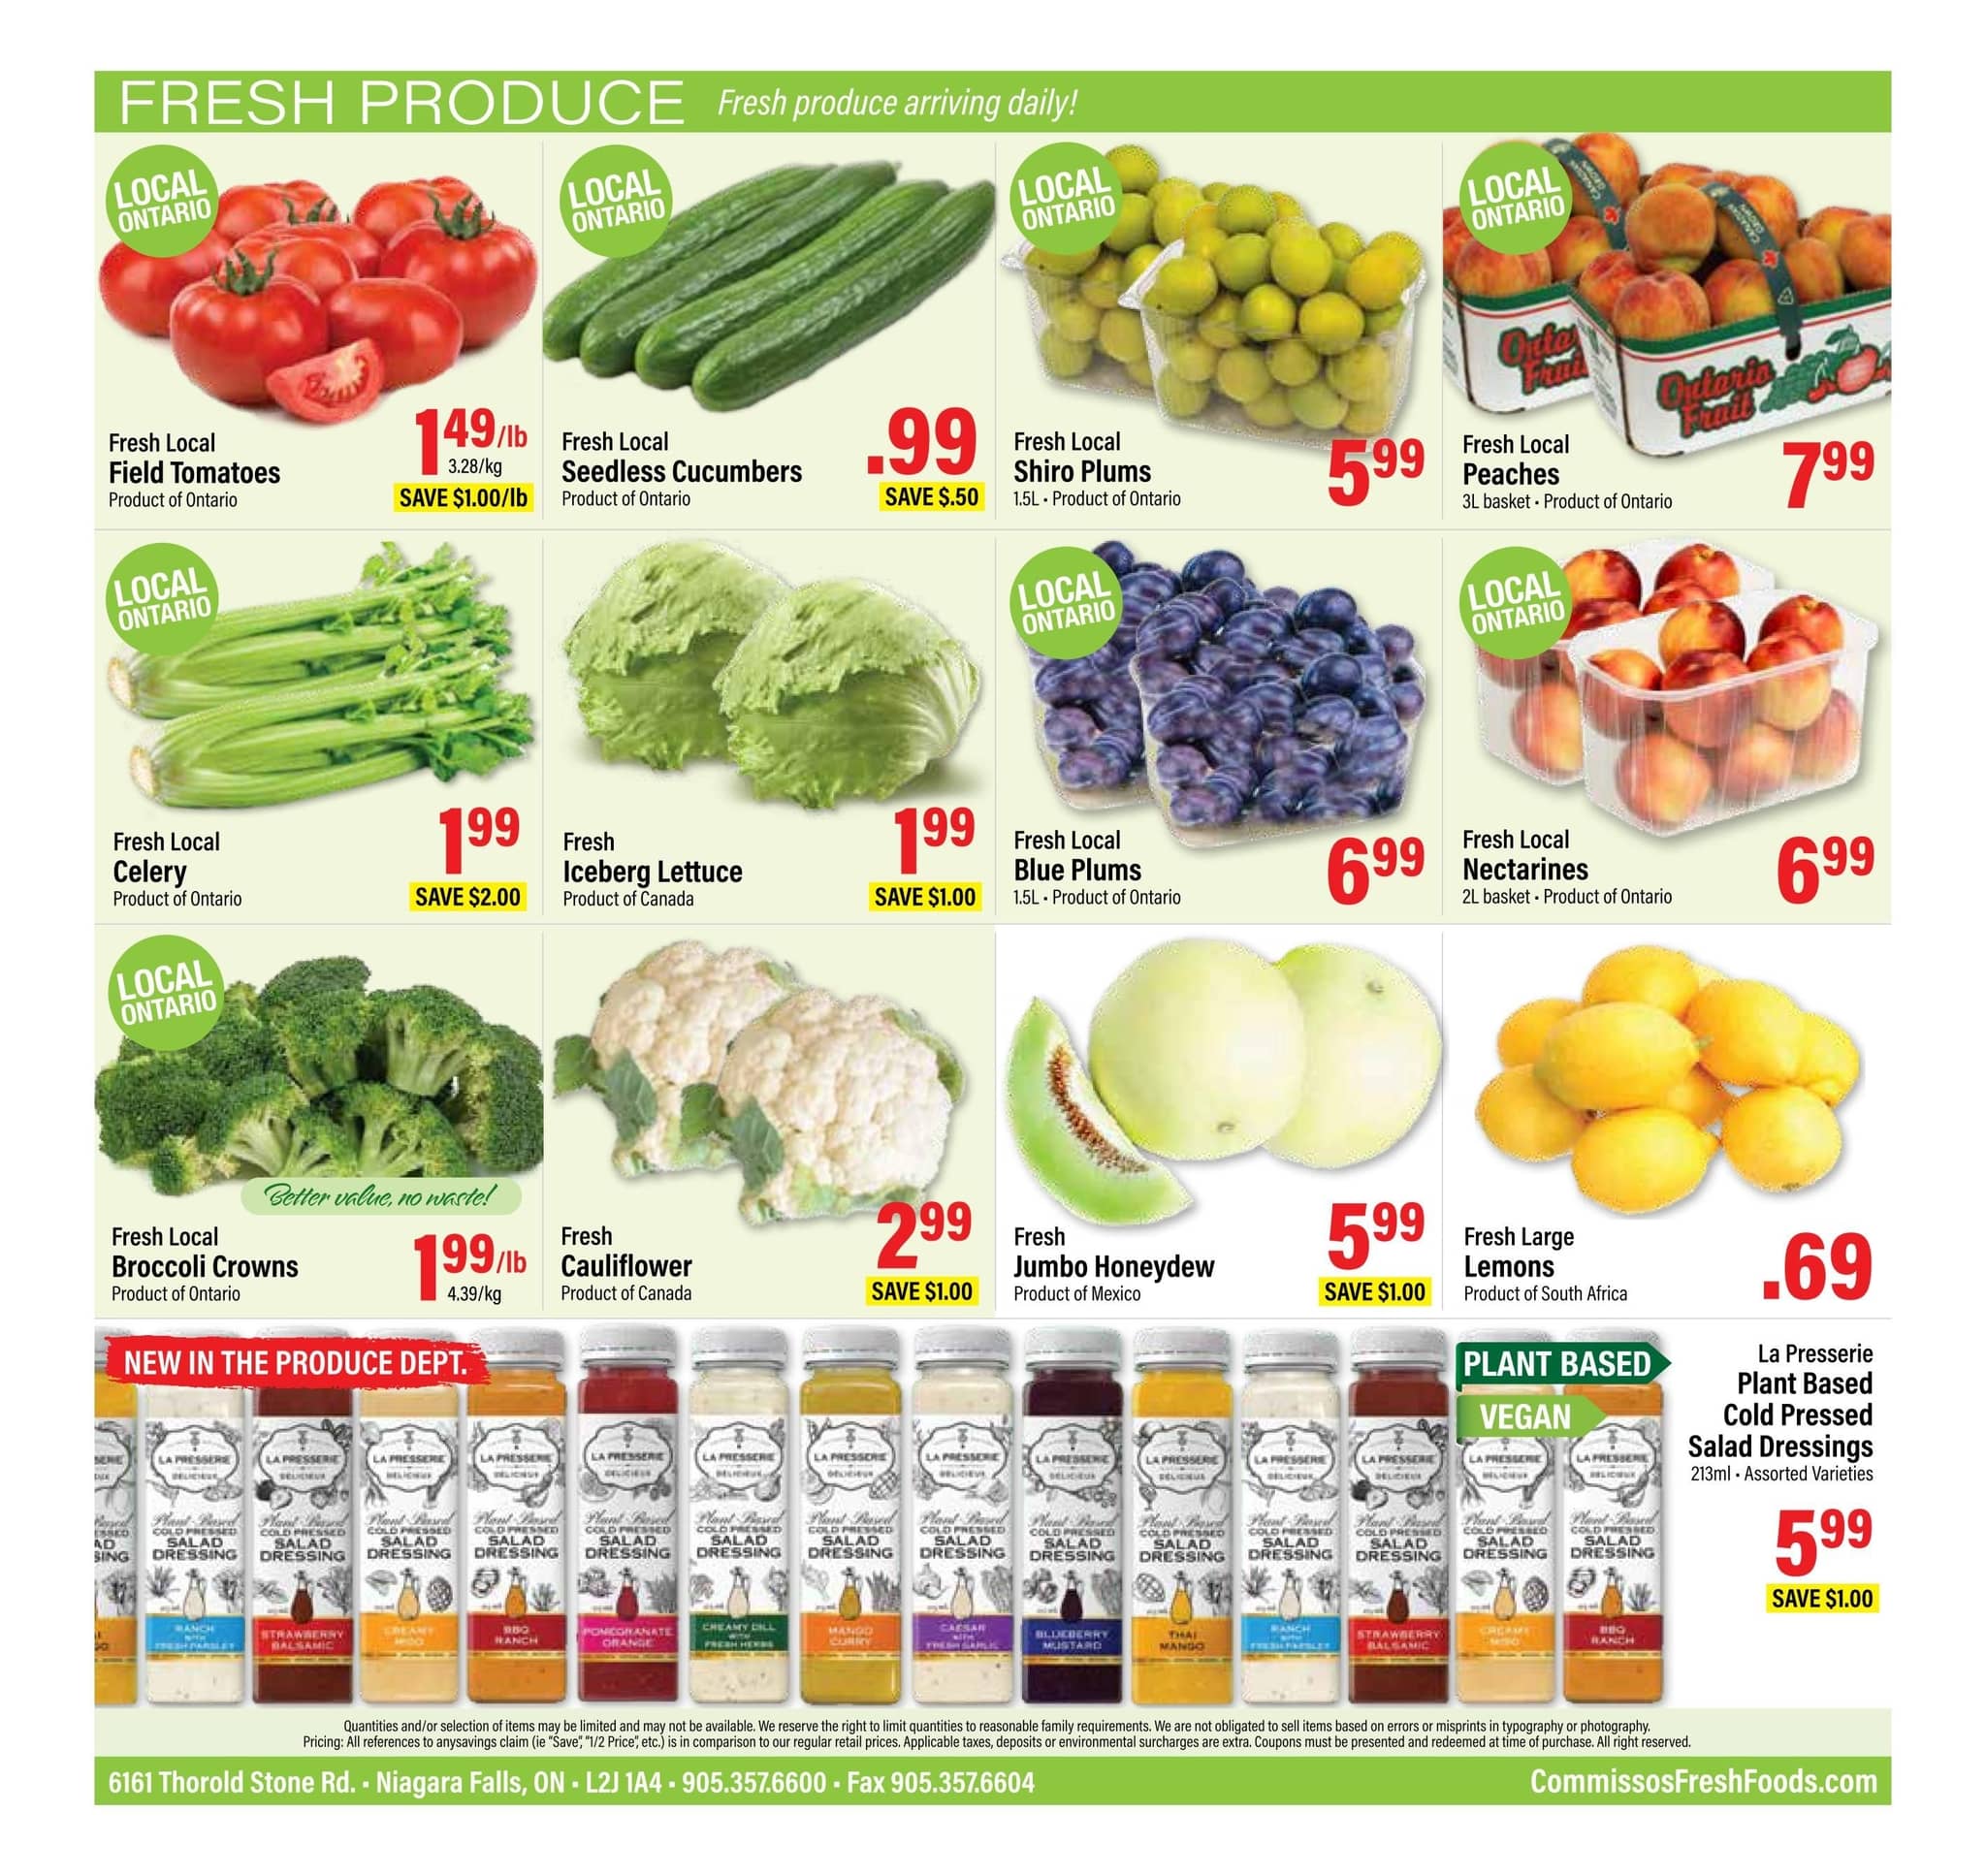 Commisso's Fresh Foods - Weekly Flyer Specials - Page 4